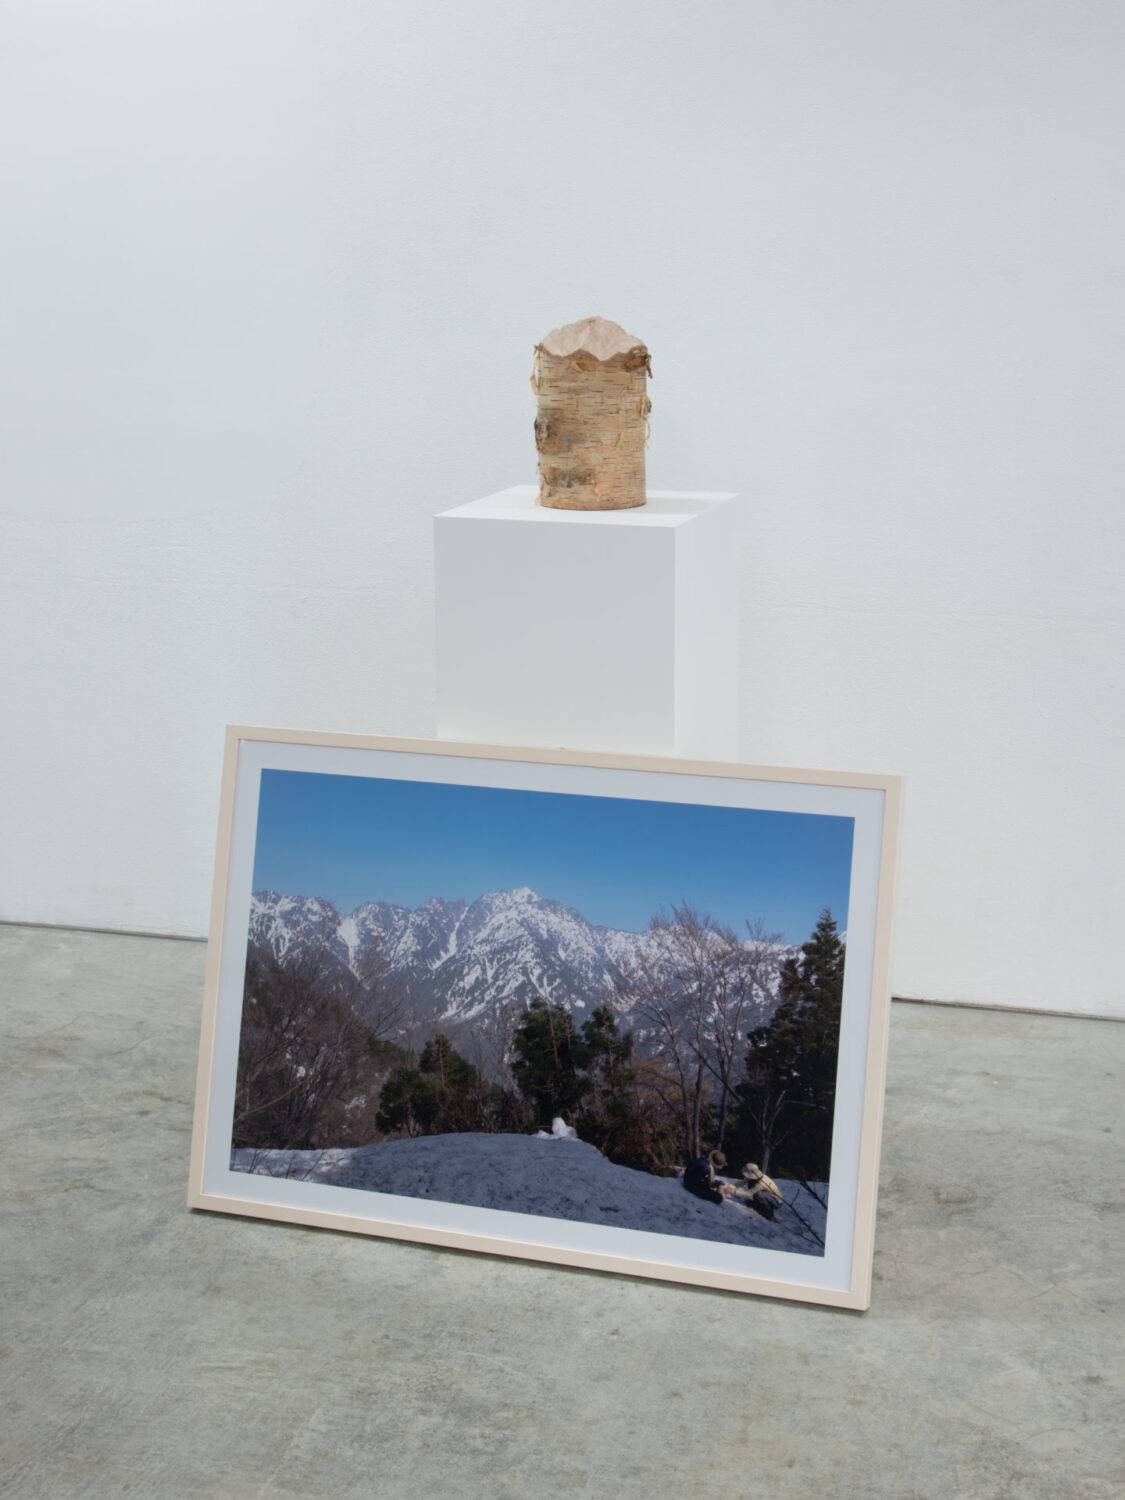 「How to make a mountain sculpture – Japanese Mountains 剱岳」2013 山下麻衣＋小林直人